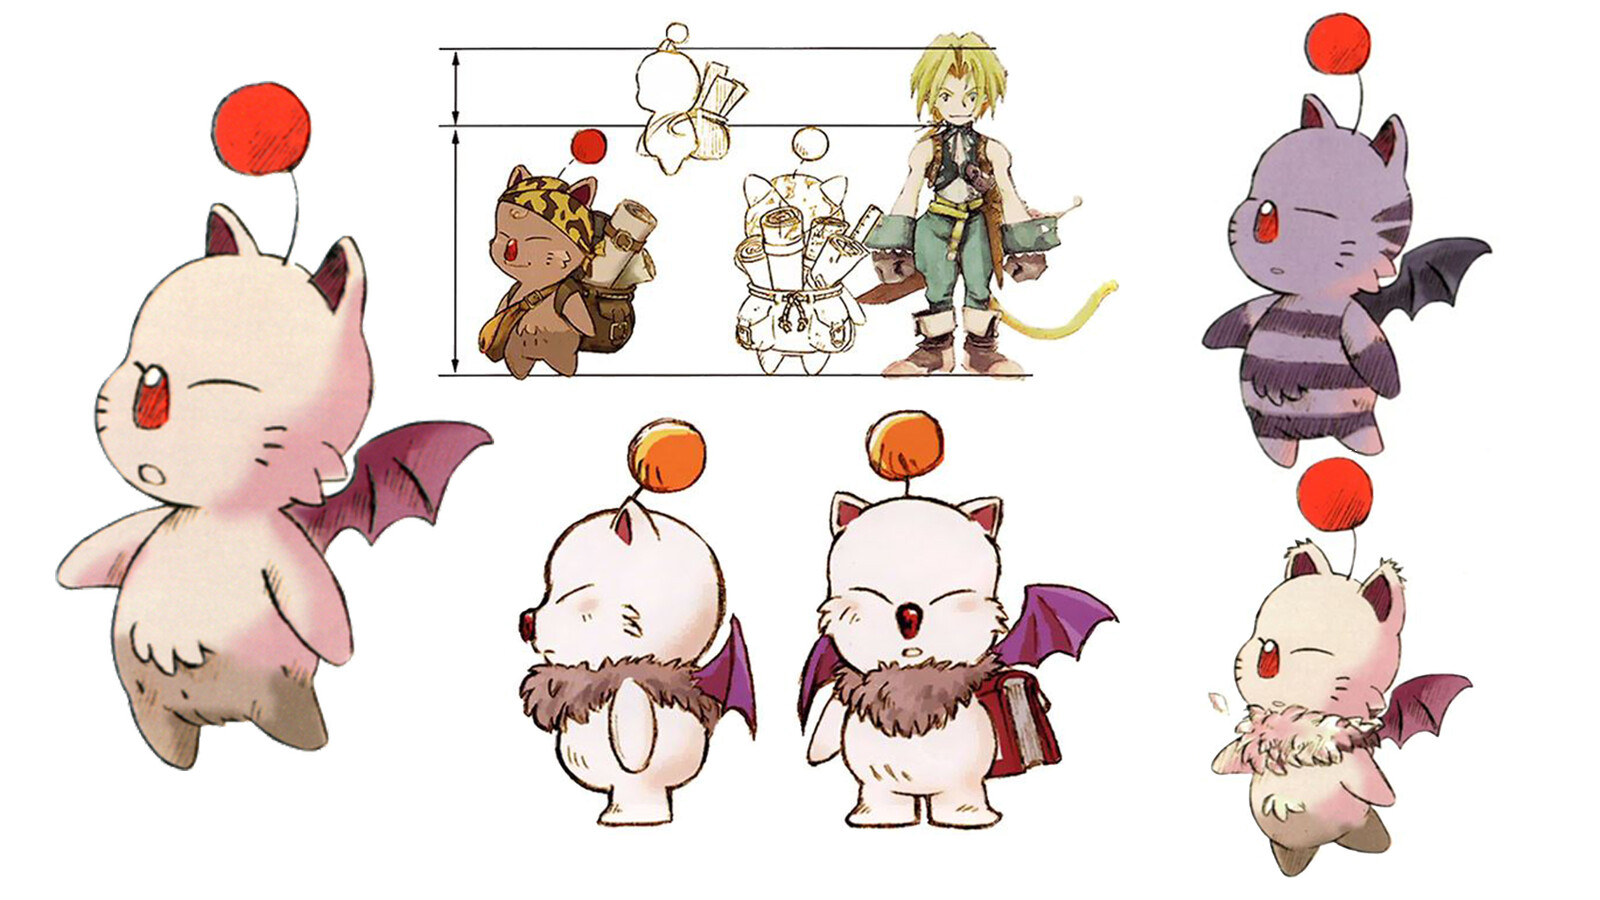 The concepts used to recreate the moogles are from the Original Game ; Final Fantasy IX